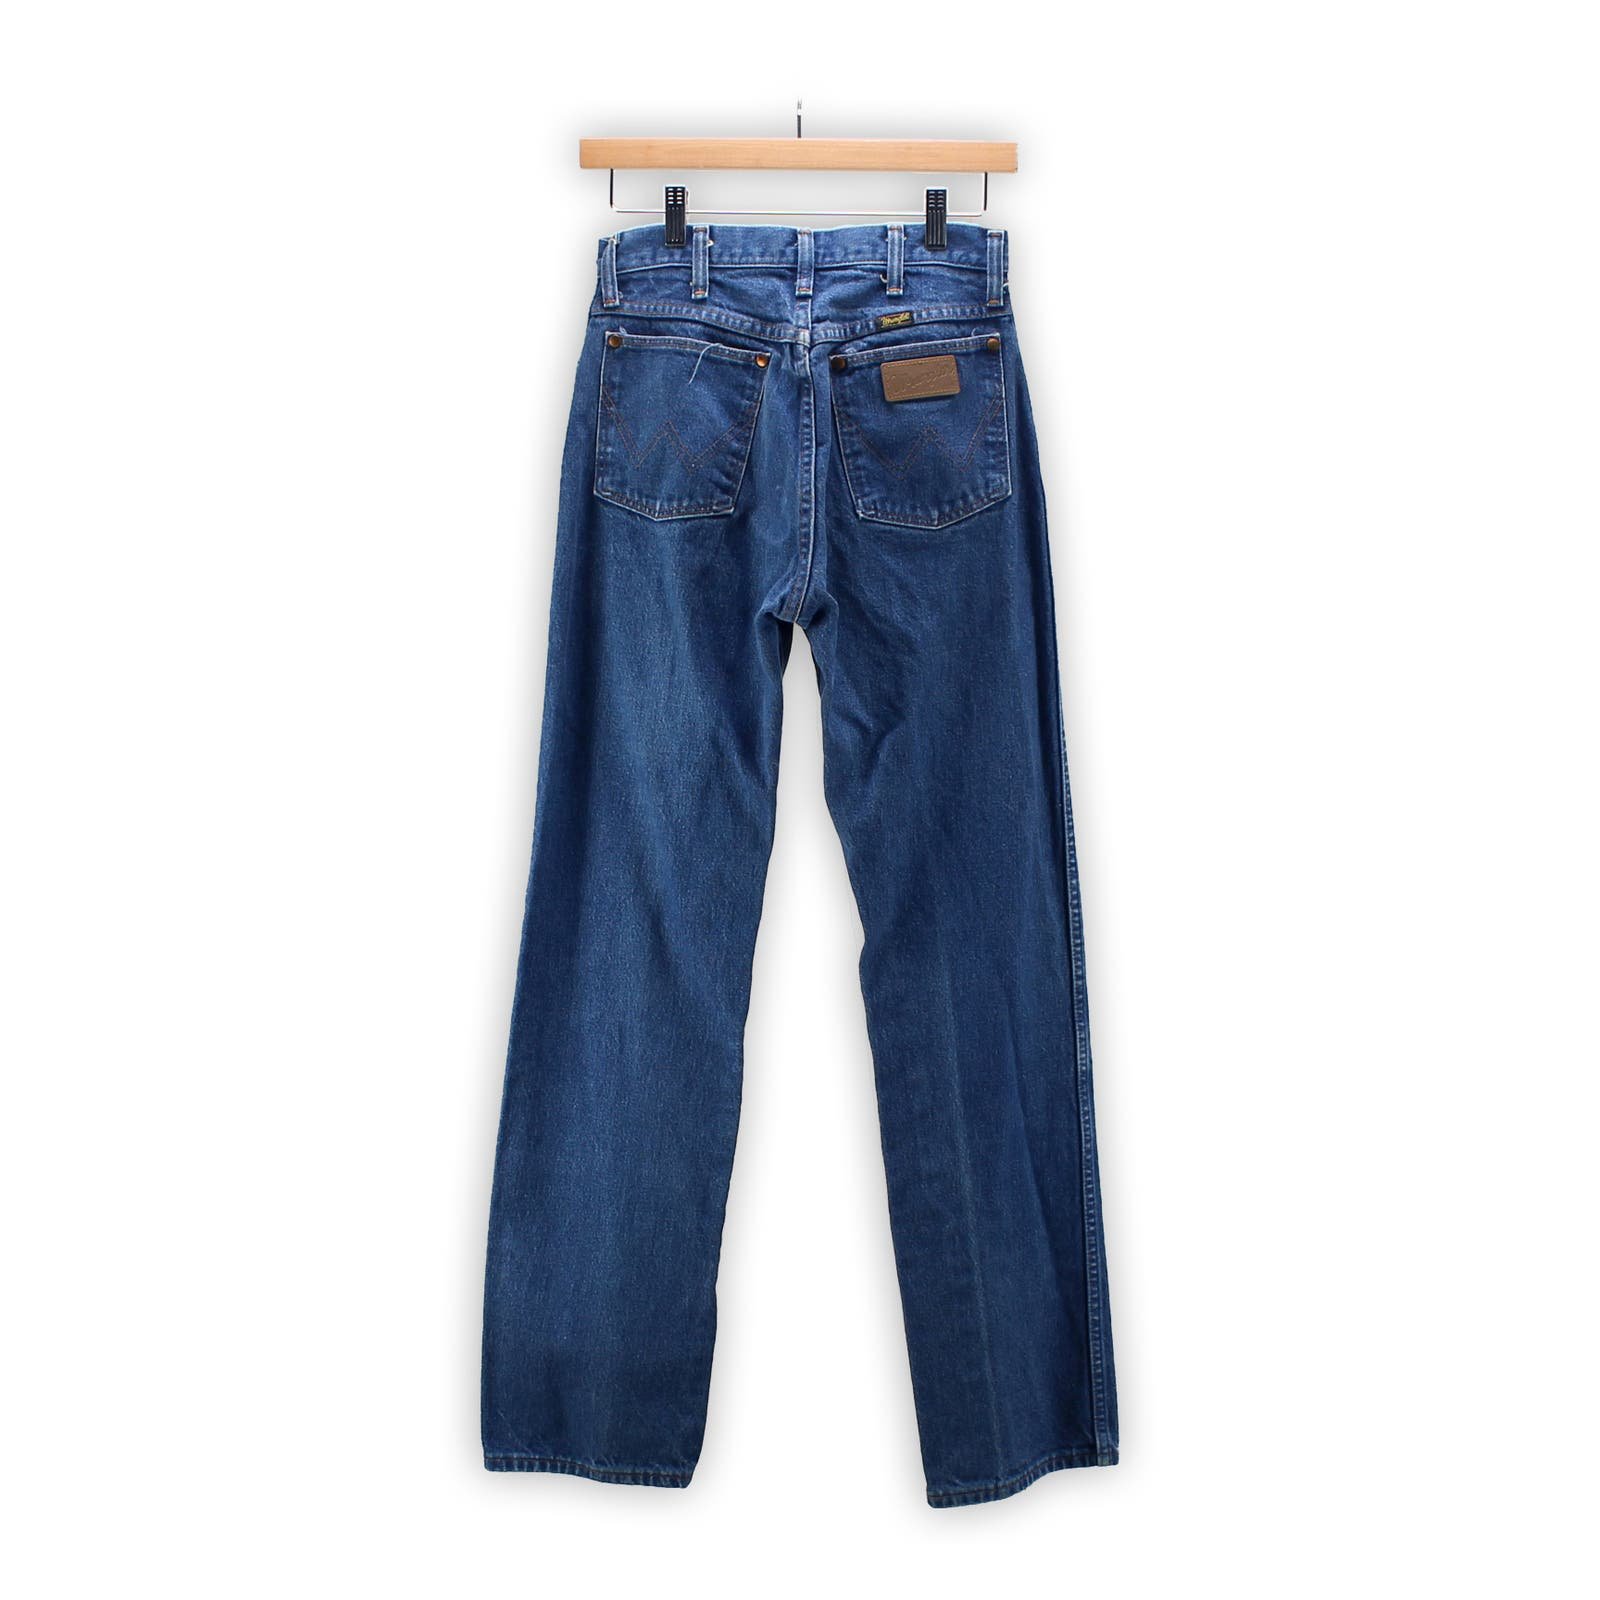 the Lowest price Wrangler Jeans - Vintage Denim Pants - Made in USA - 26 Waist - Size 7 gTHBOhm1z Store Online